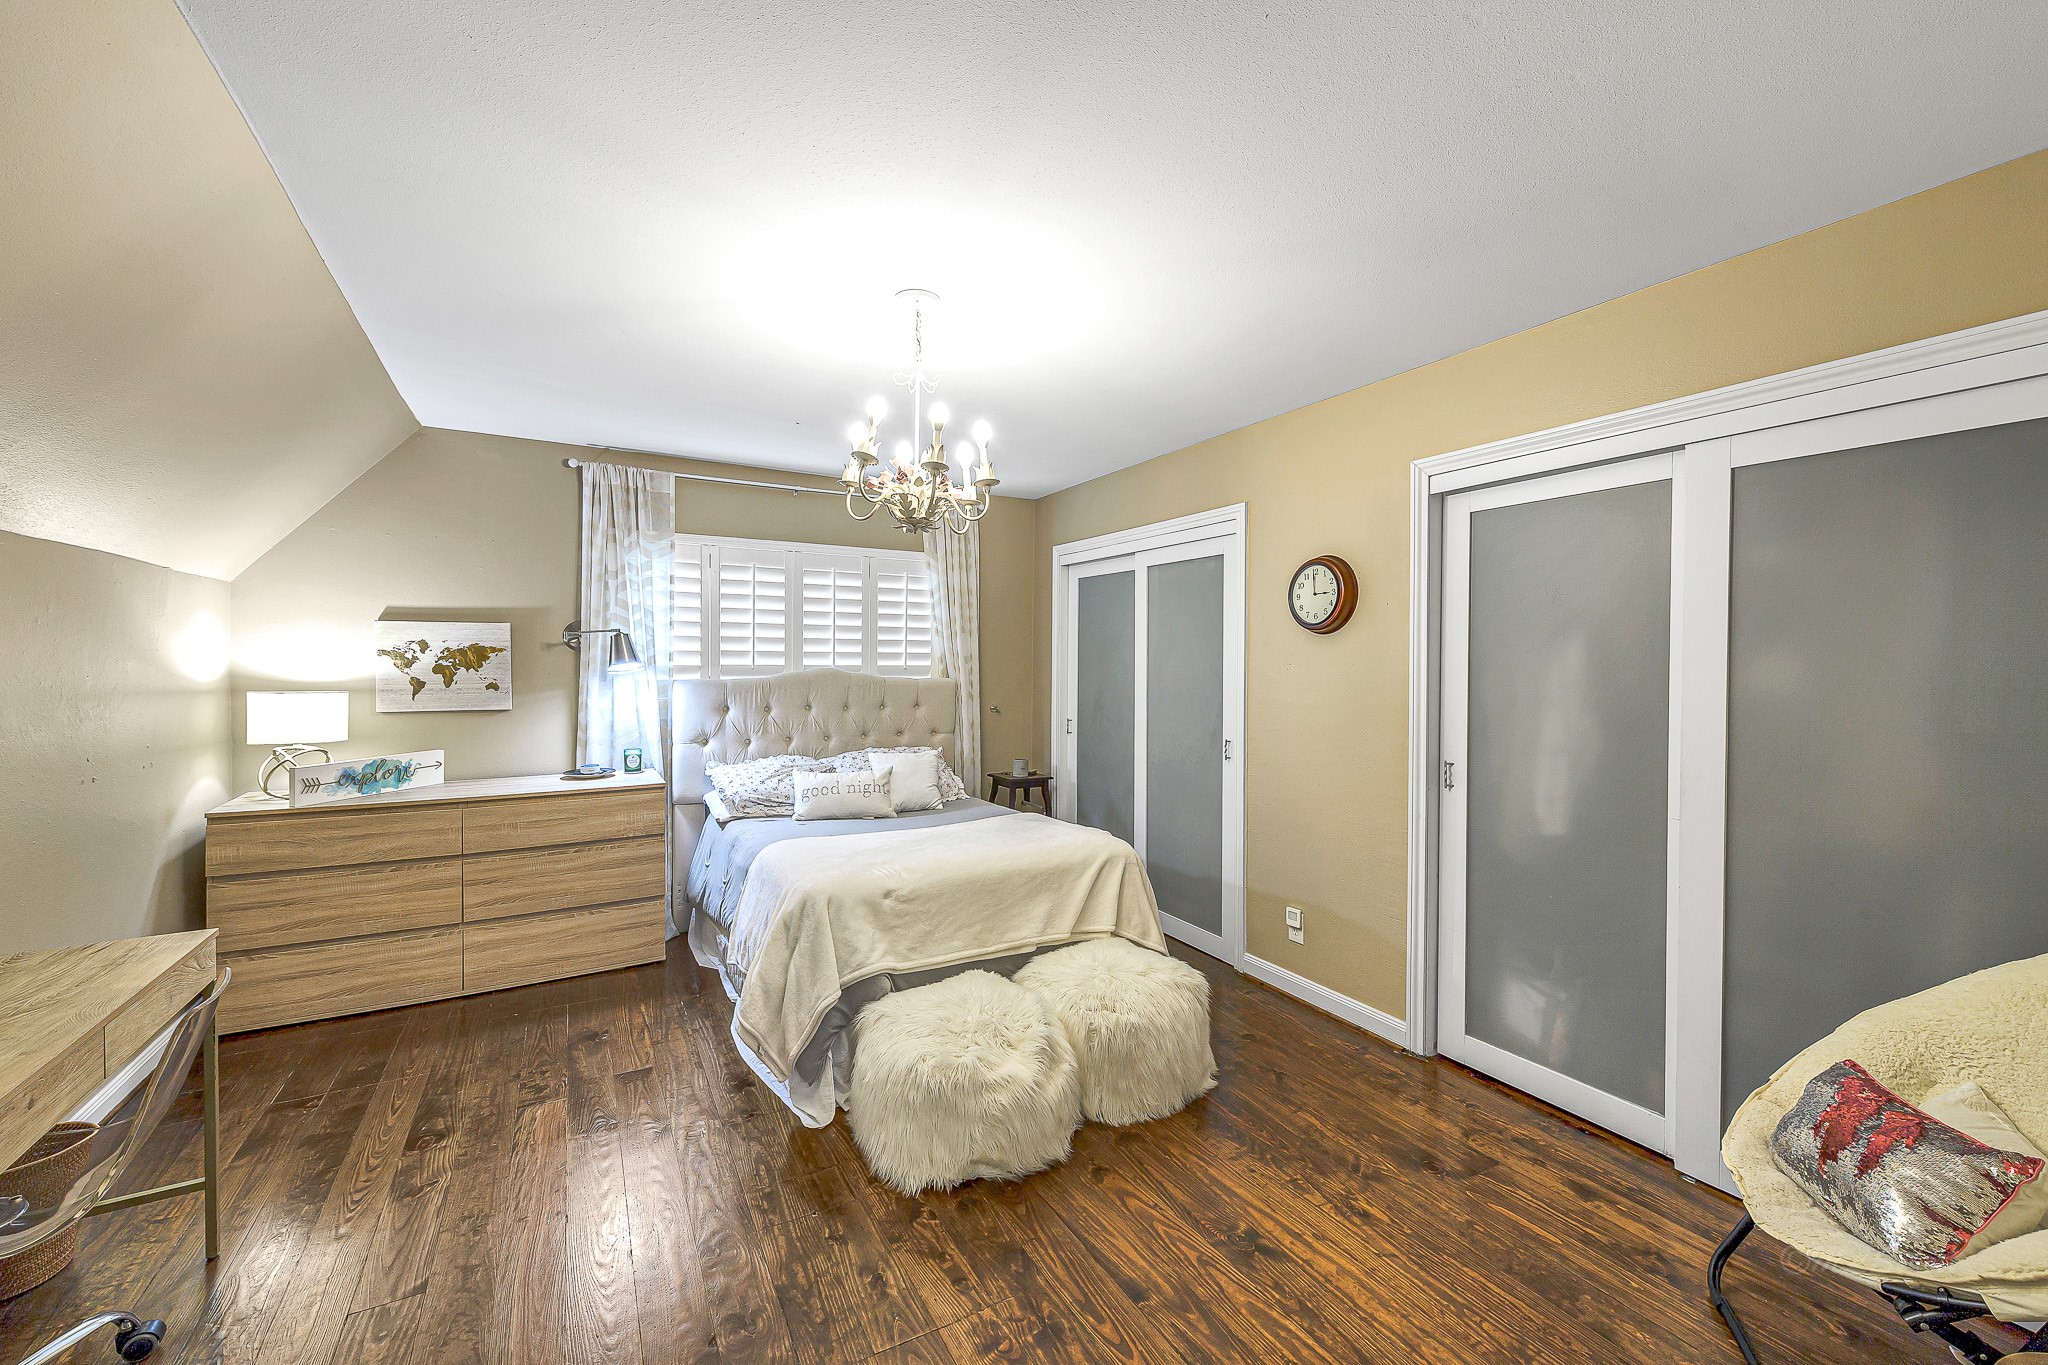 This inviting secondary retreat located upstairs is adorned with a warm color palette, wood flooring, and double closets, creating a space that's both cozy and highly functional.